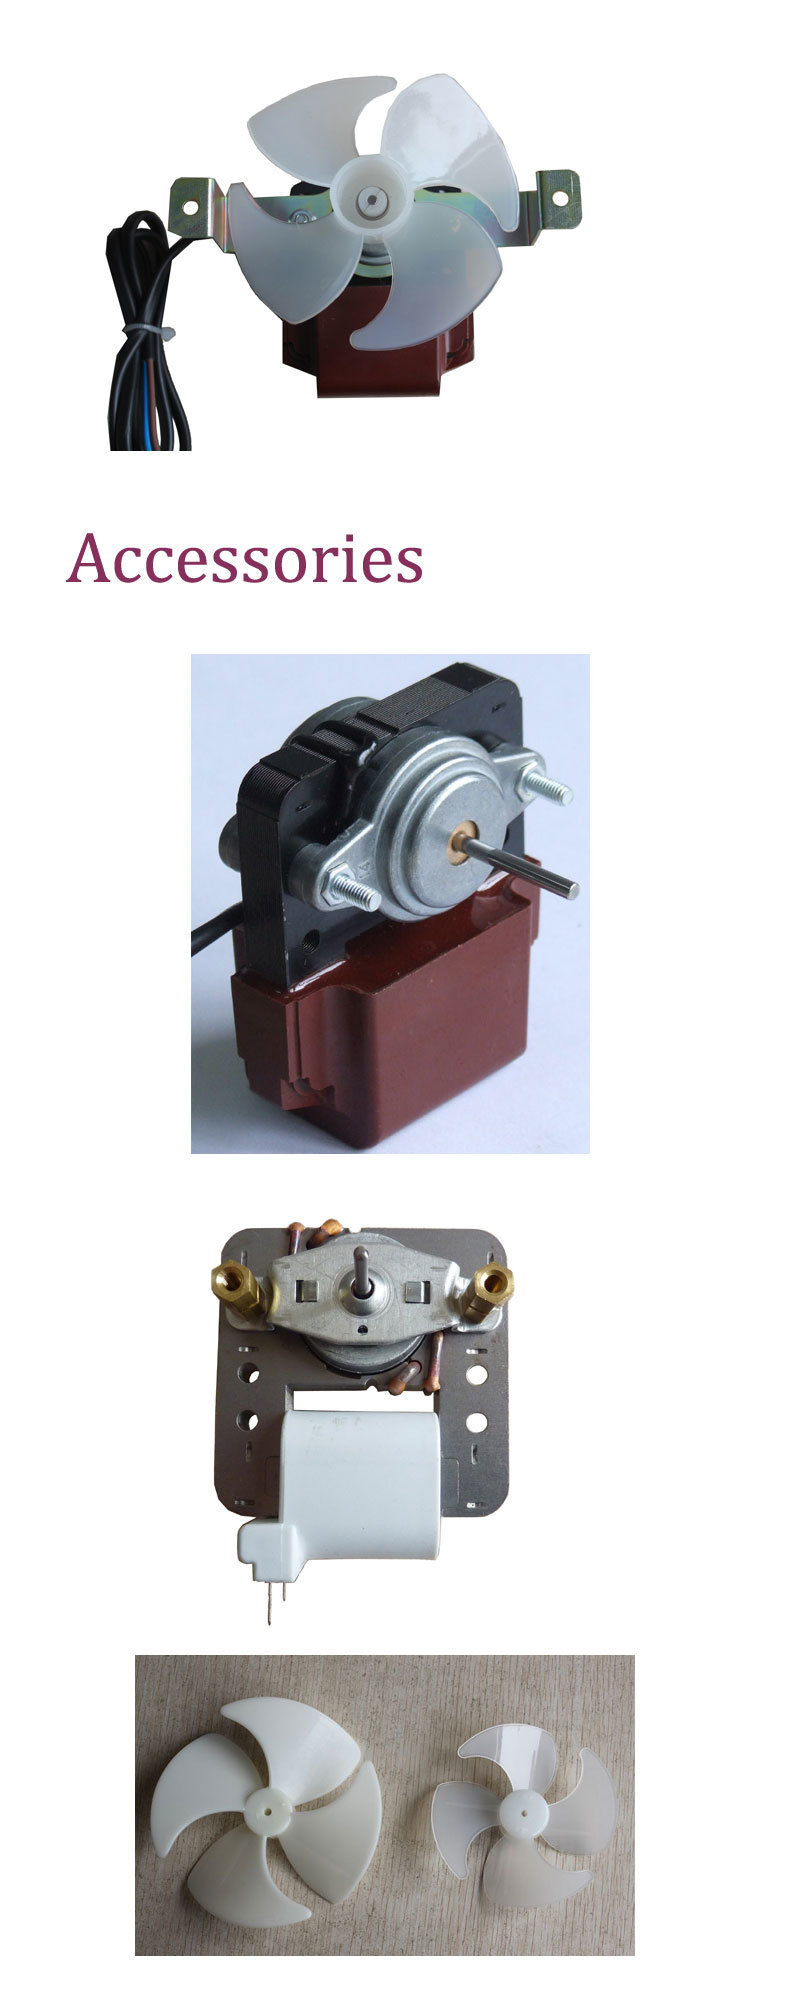 220V Single Phase Shaded Pole AC Motor Engine for Refrigerator Fan Motor/Convection Oven Fans